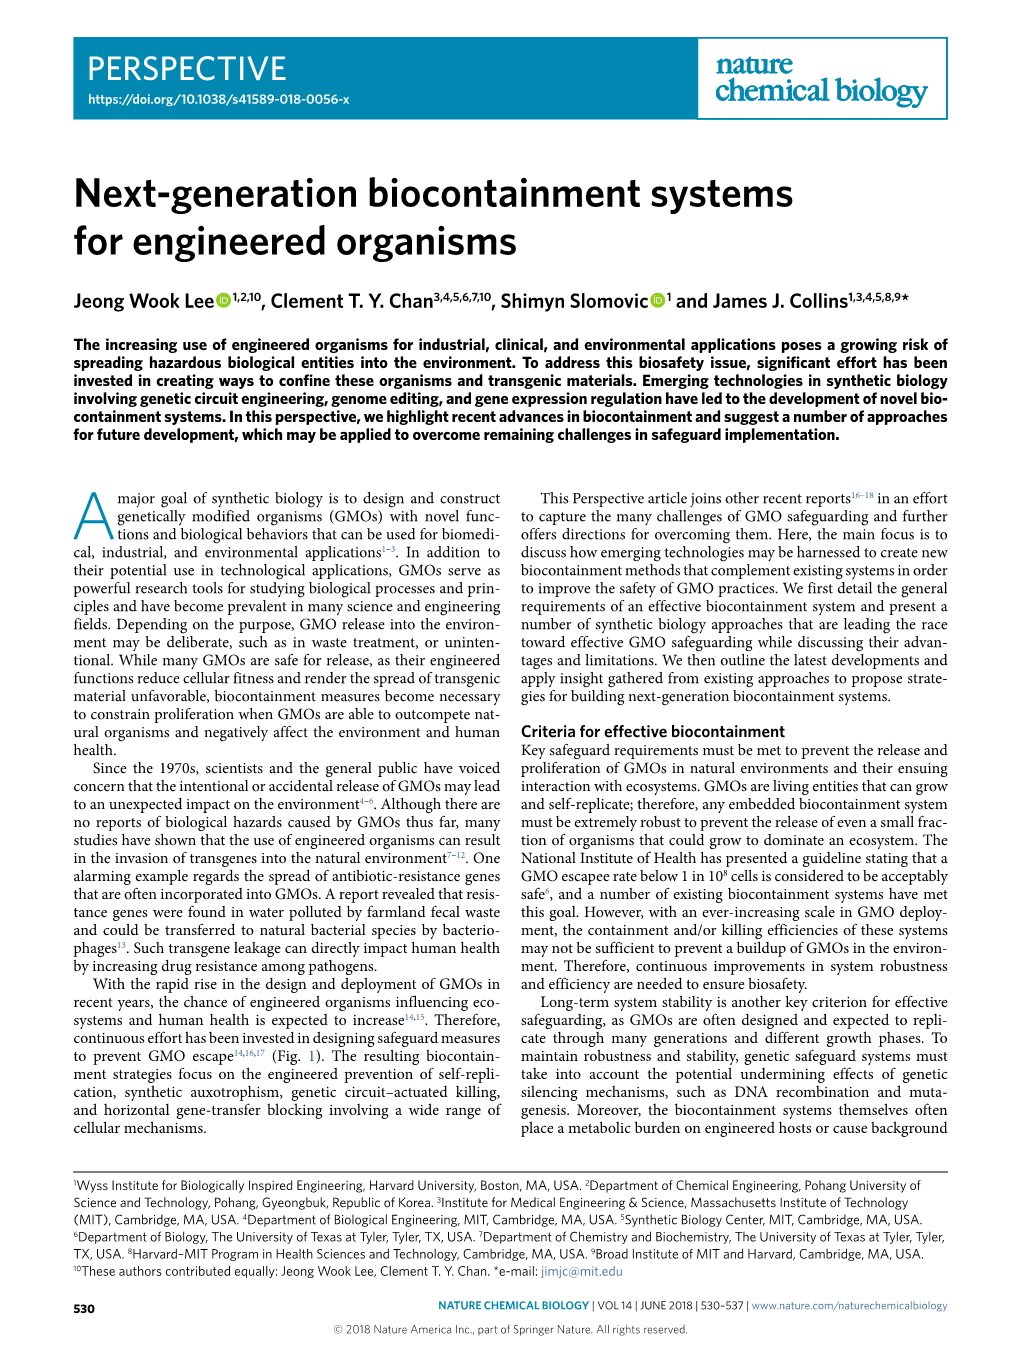 Next-Generation Biocontainment Systems for Engineered Organisms